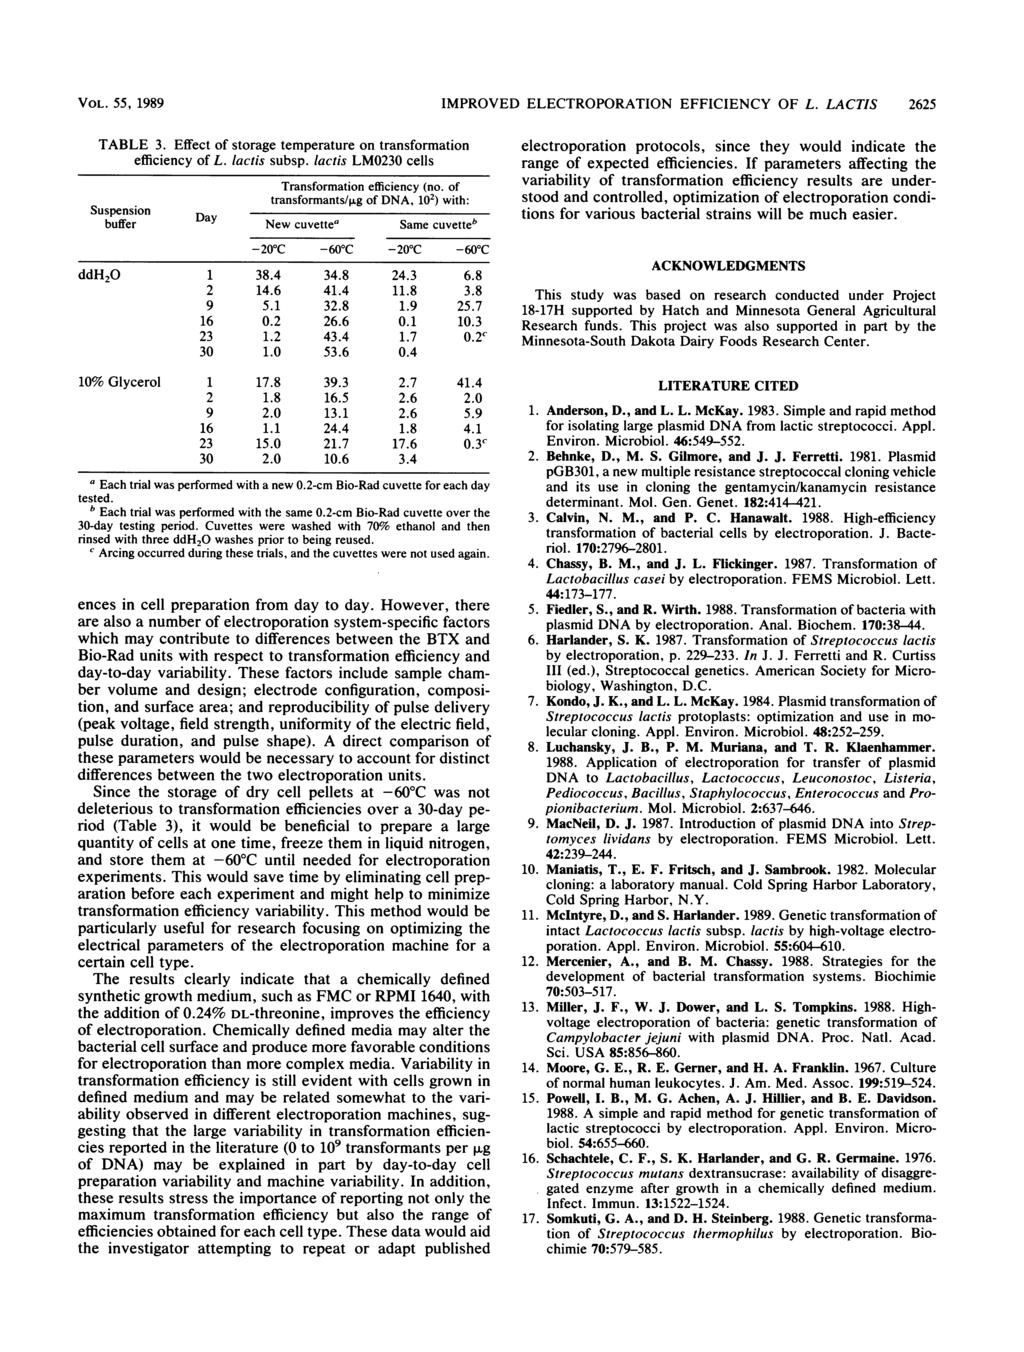 VOL. 55, 1989 IMPROVED ELECTROPORATION EFFICIENCY OF L. LACTIS 2625 TABLE 3. Effect of storage temperature on transformation efficiency of L. lactis subsp.